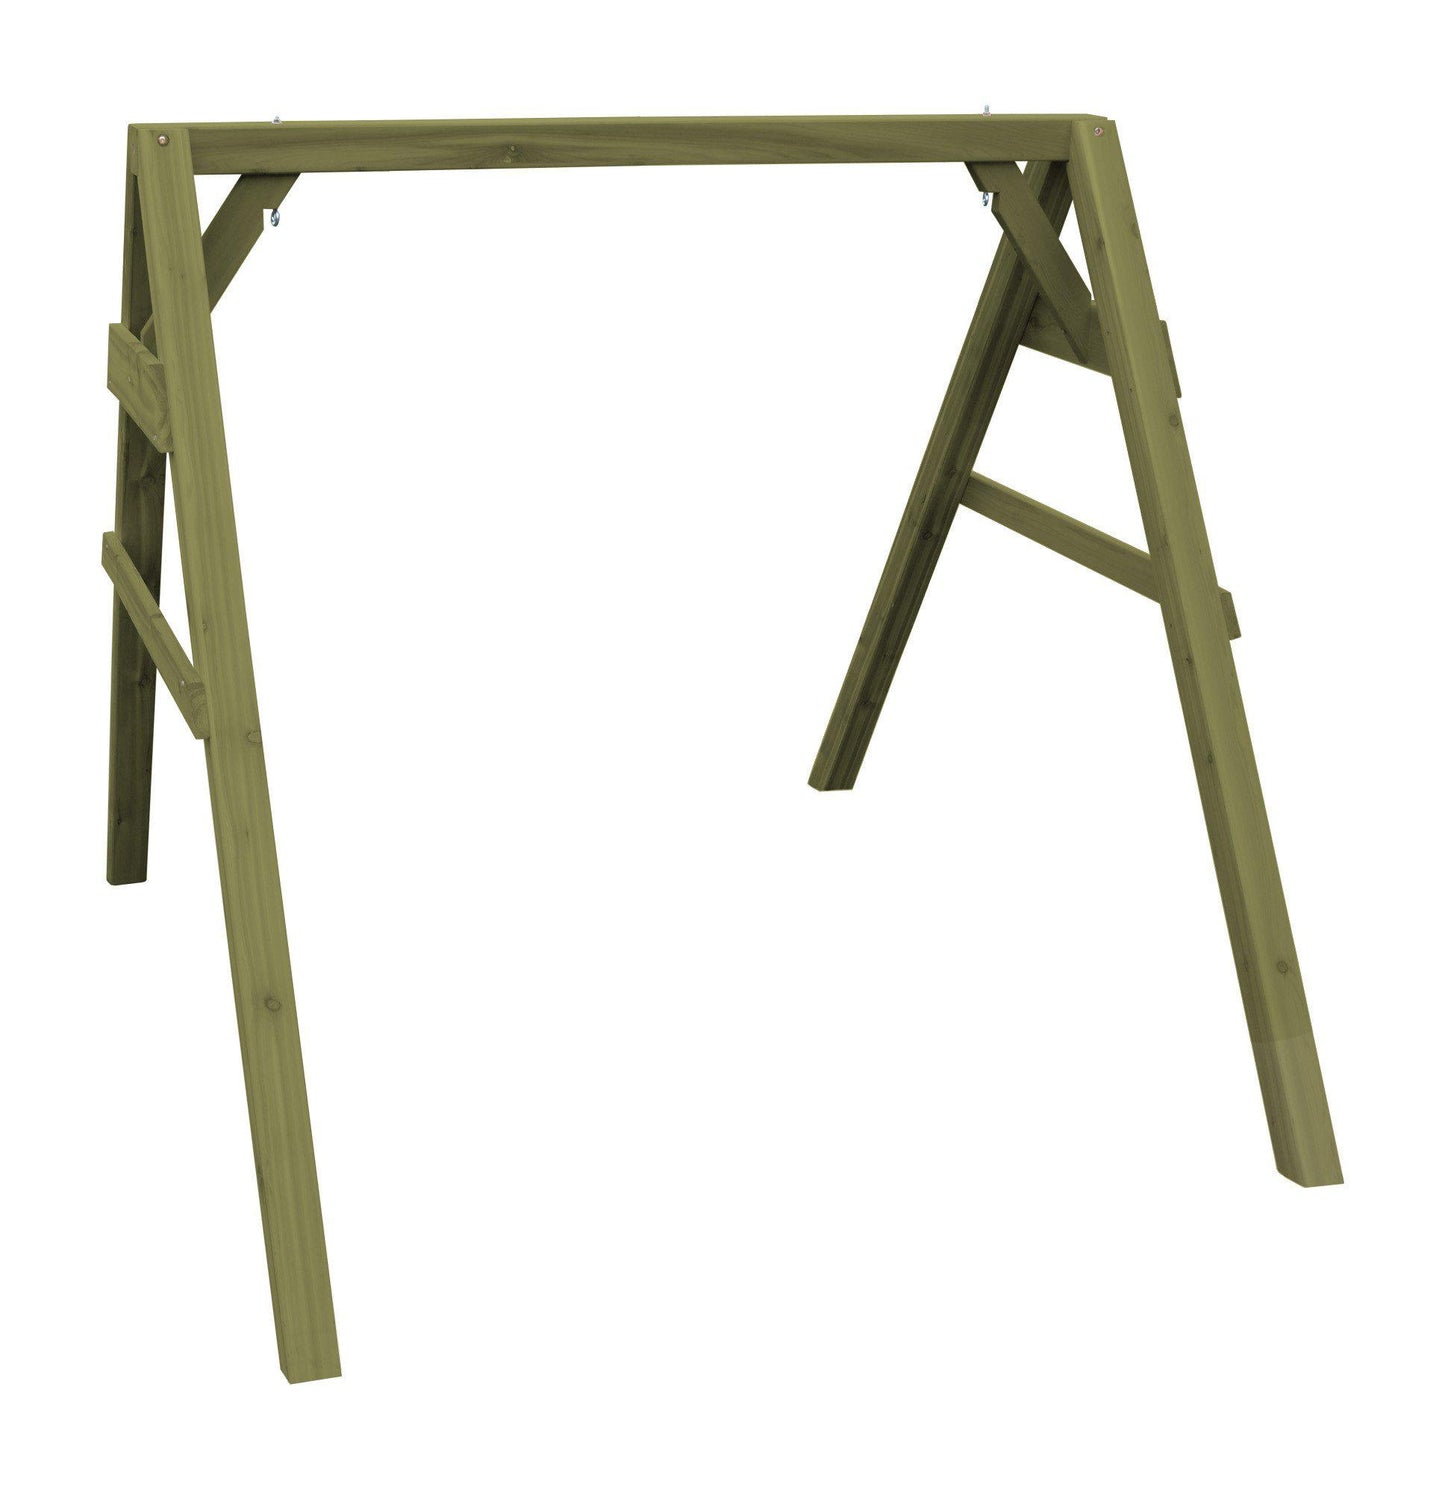 A&L Furniture Co. 4ft  4x4  A-Frame  Red Cedar Swing Stand for Swing or Swingbed Heavy Duty 900 lbs Max Weight Capacity (Hangers Included) - LEAD TIME TO SHIP 4 WEEKS OR LESS